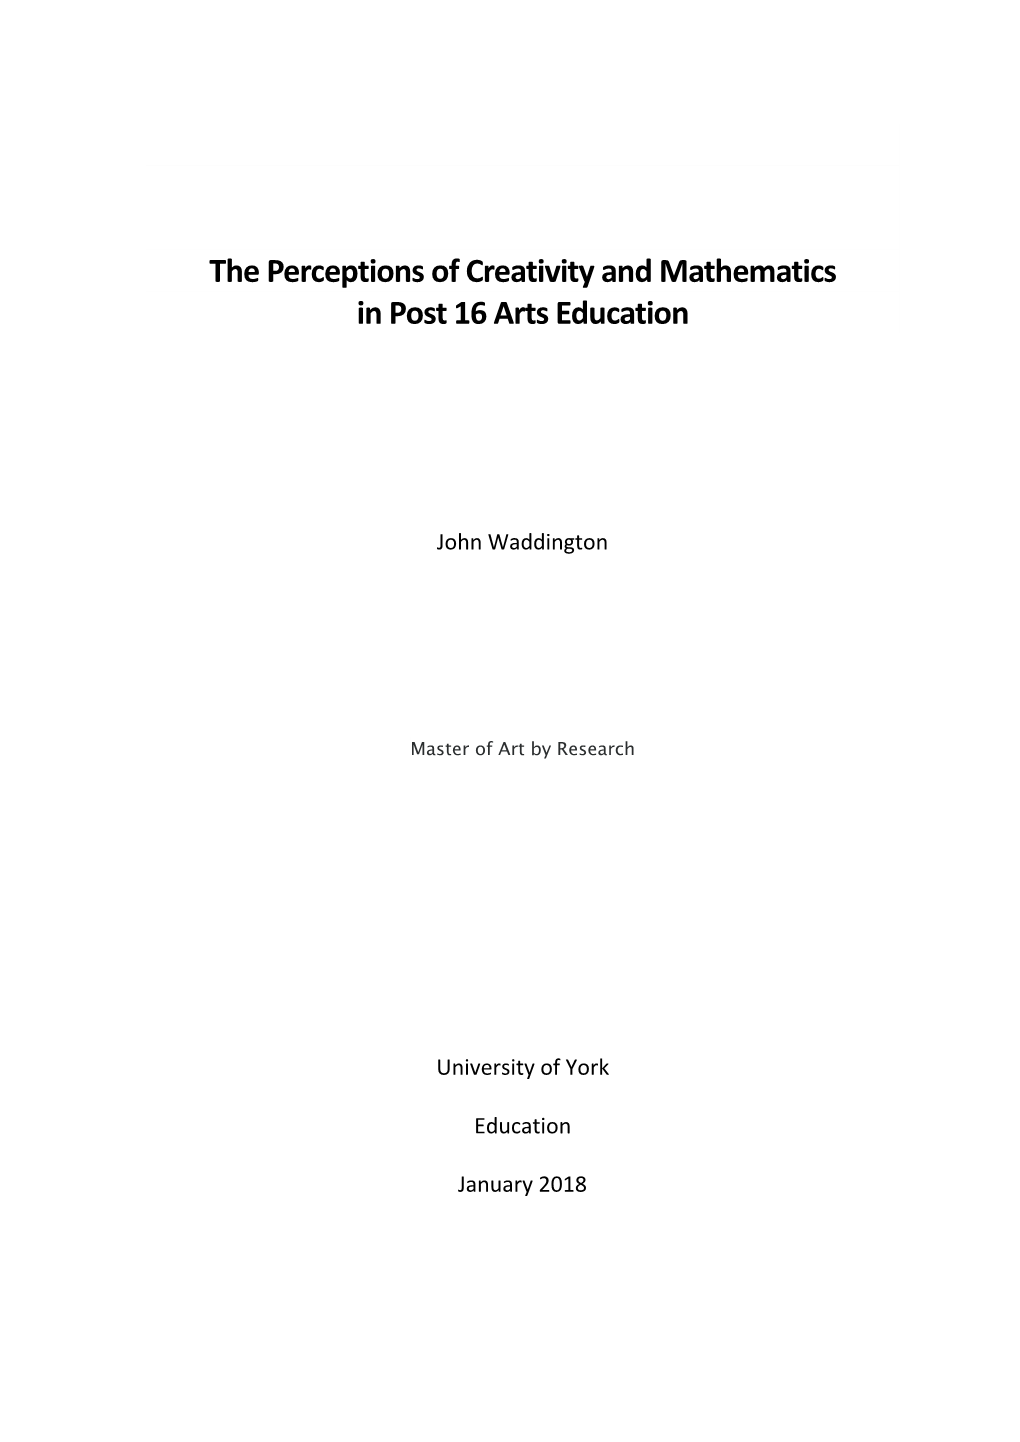 The Perceptions of Creativity and Mathematics in Post 16 Arts Education